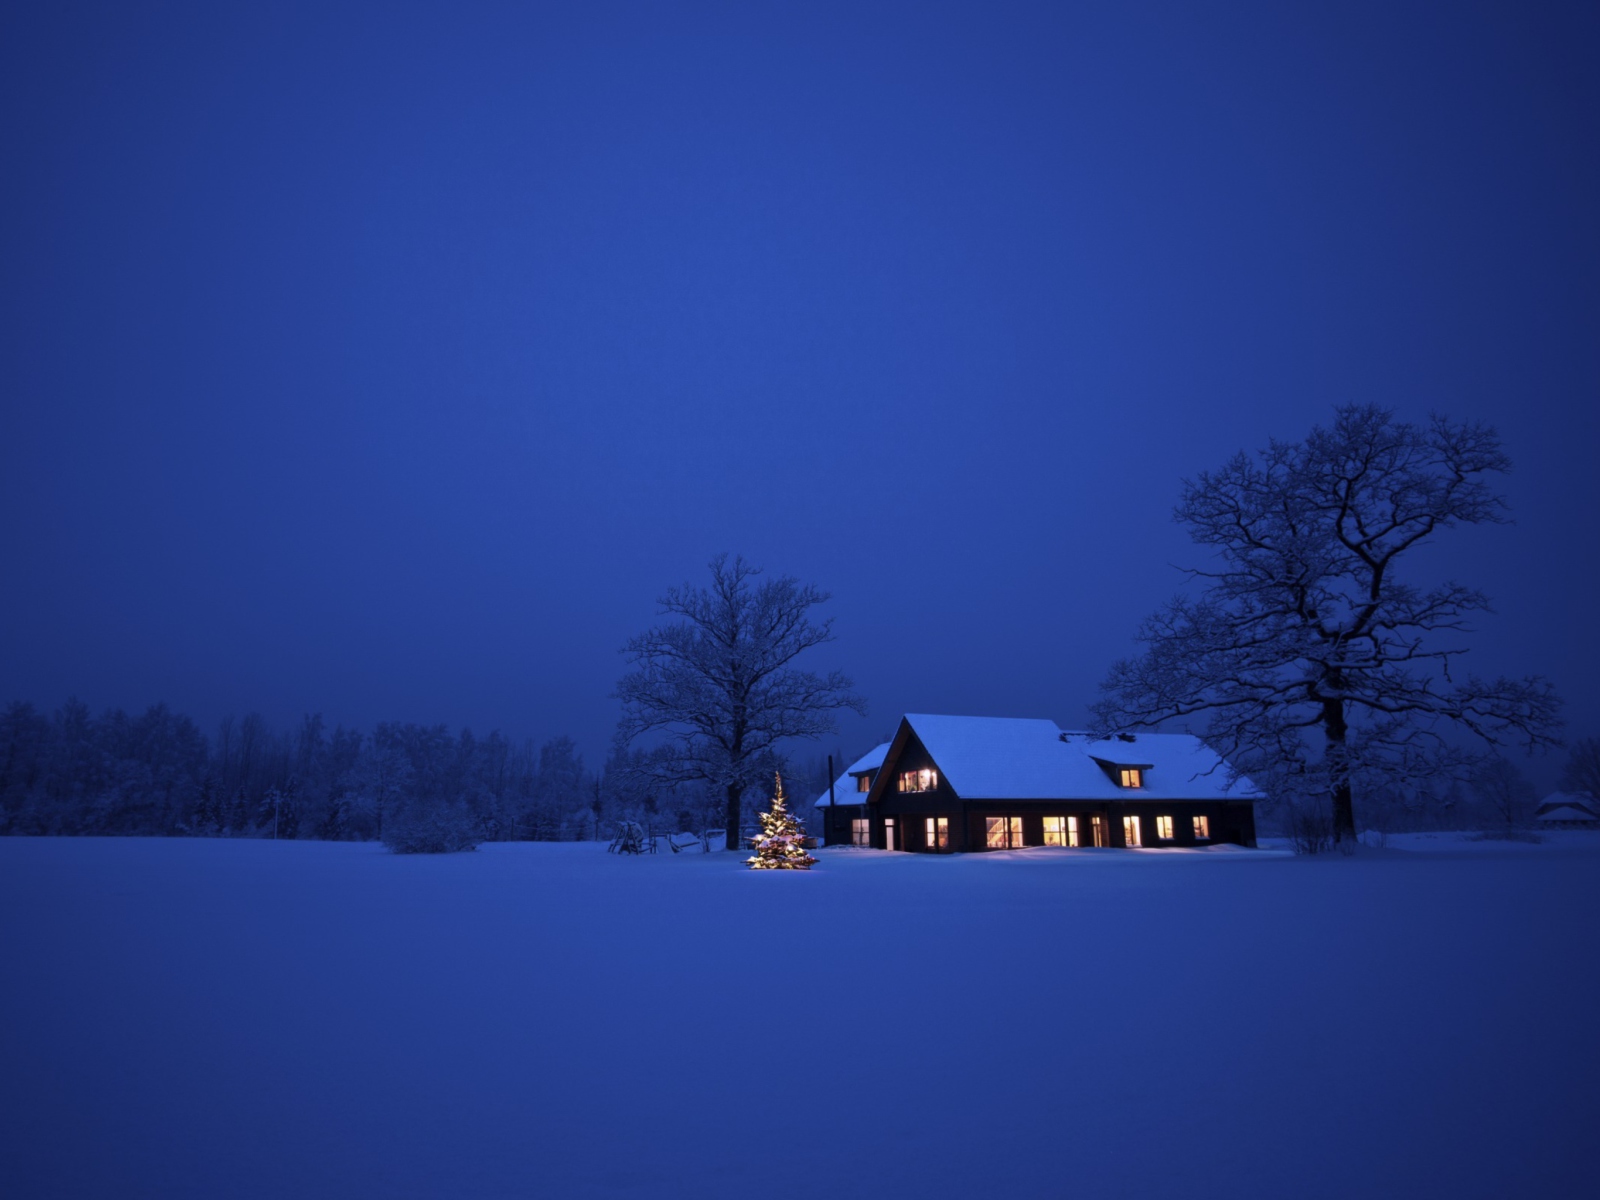 Das Lonely House, Winter Landscape And Christmas Tree Wallpaper 1600x1200